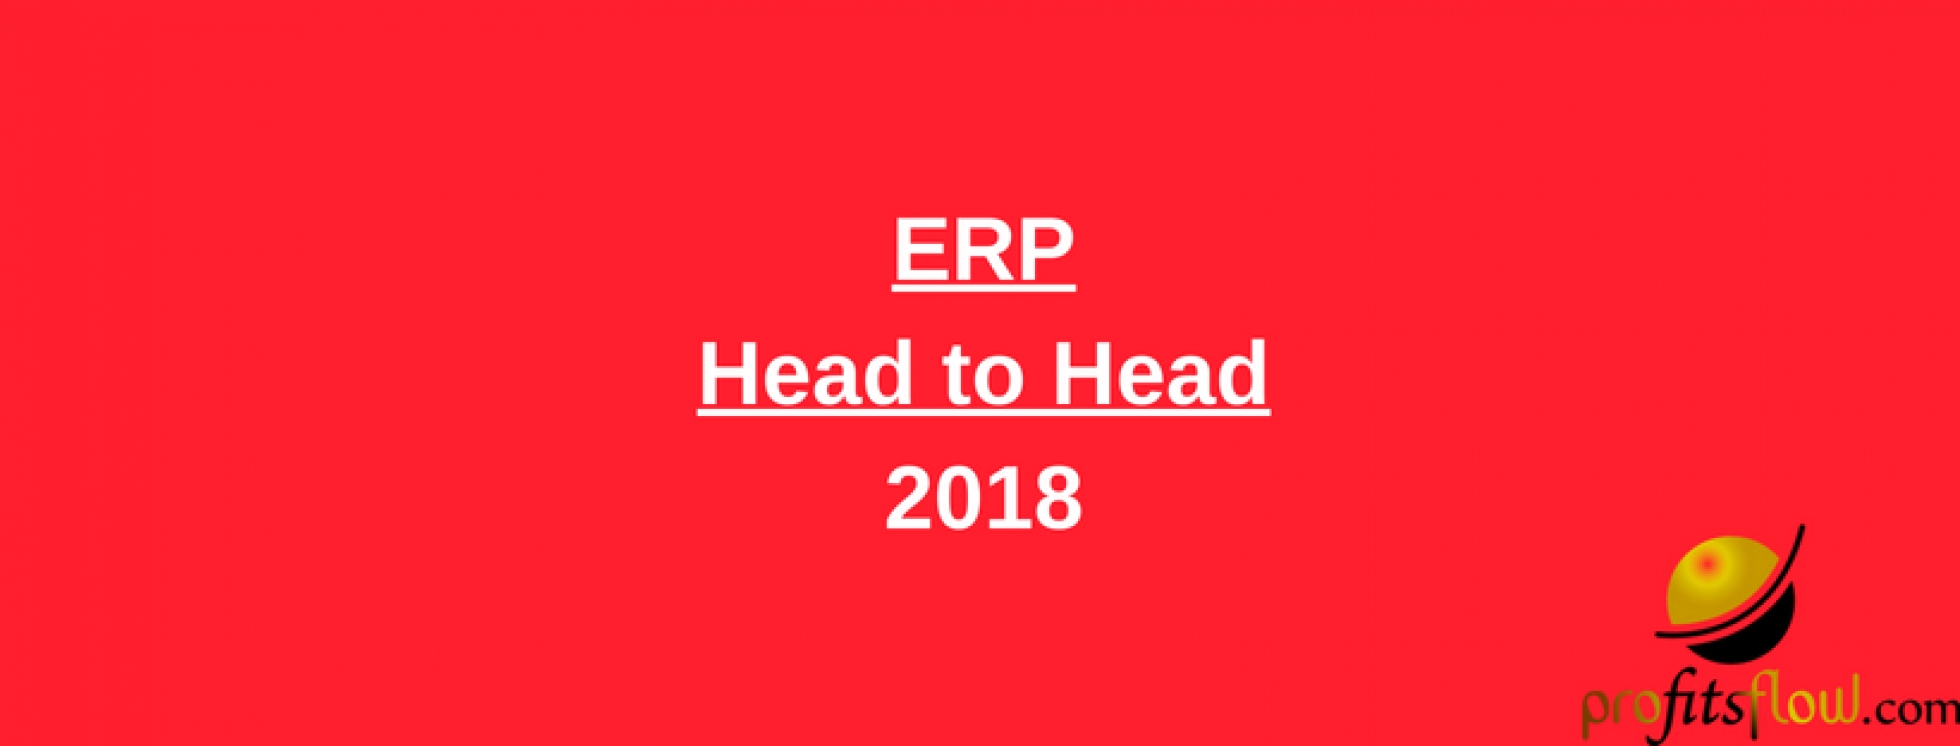 ERP Head to Head Event October 16th & 17th 2018